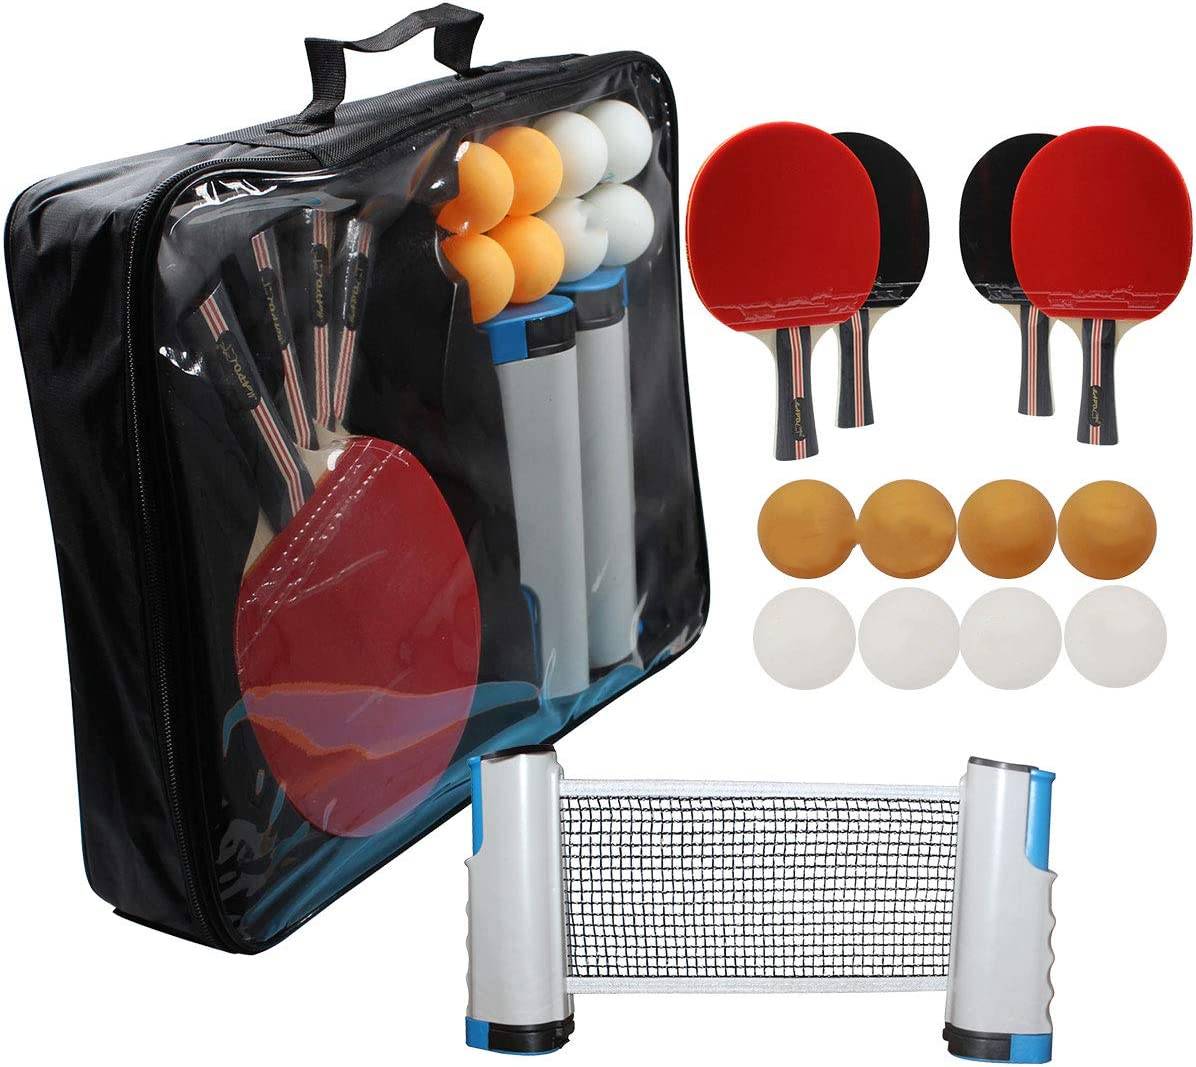 Factory OEM best ping pong paddle set, Portable Table Tennis Set with Retractable Net, Perfect for Professional Play and Amateurs